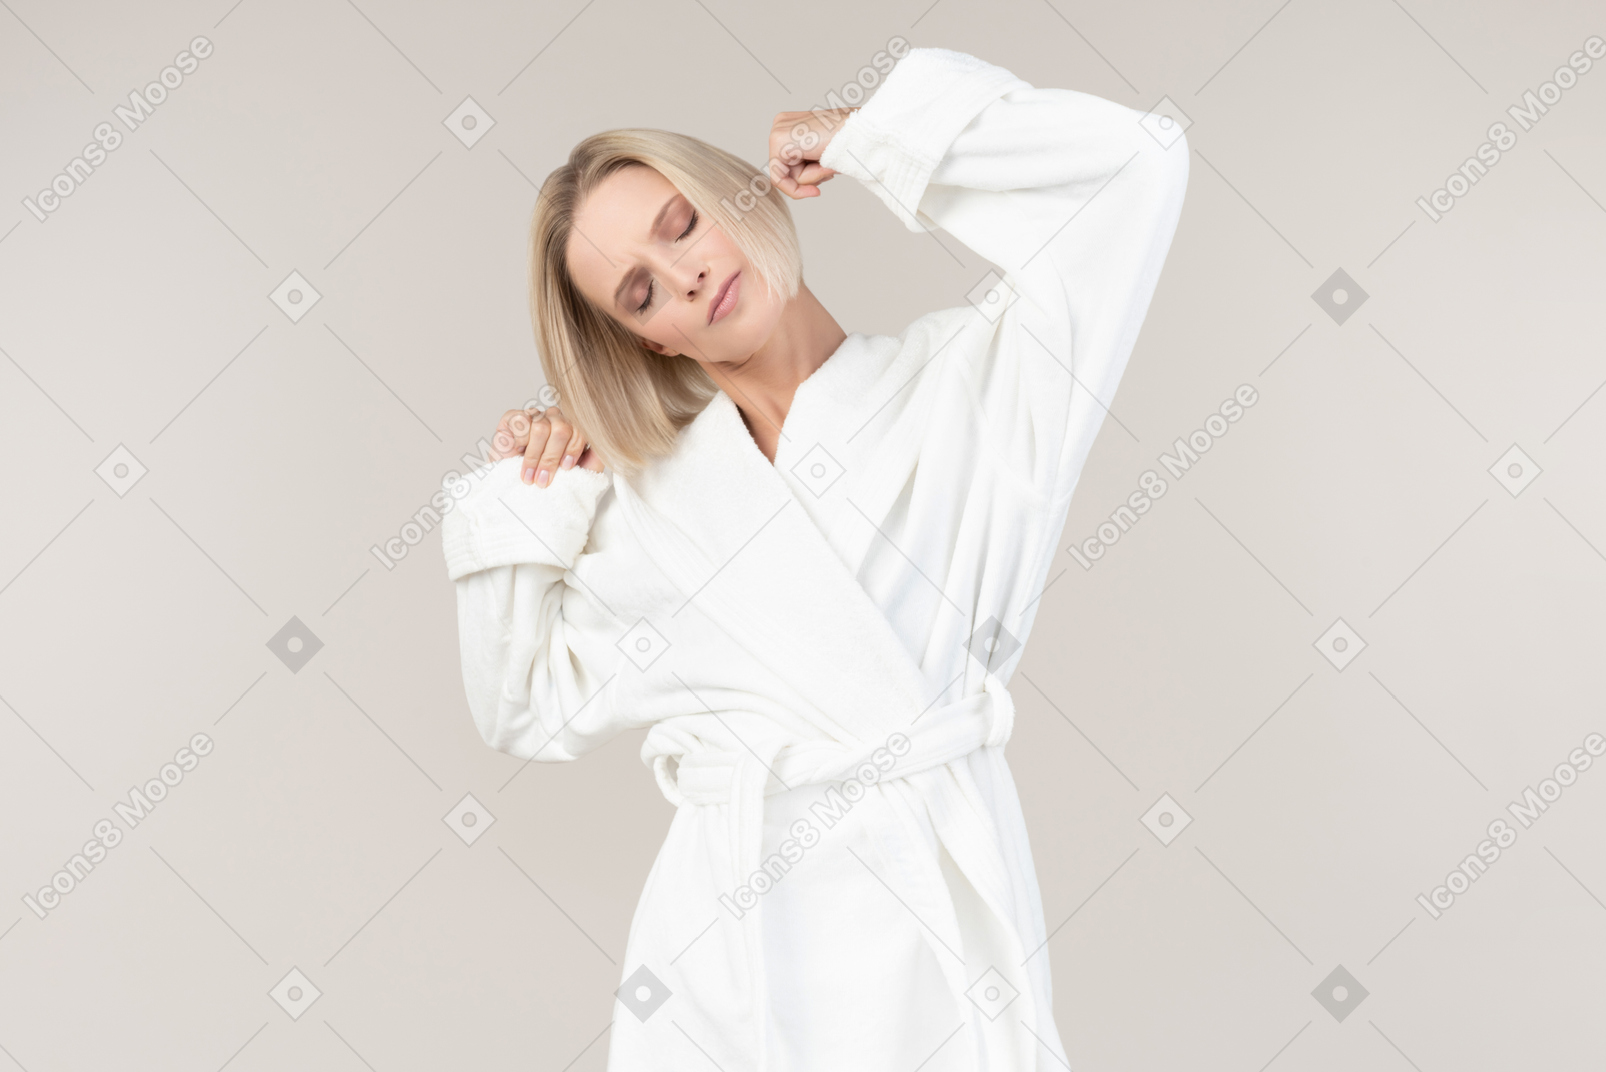 Pretty young girl in bathrobe stretching hands